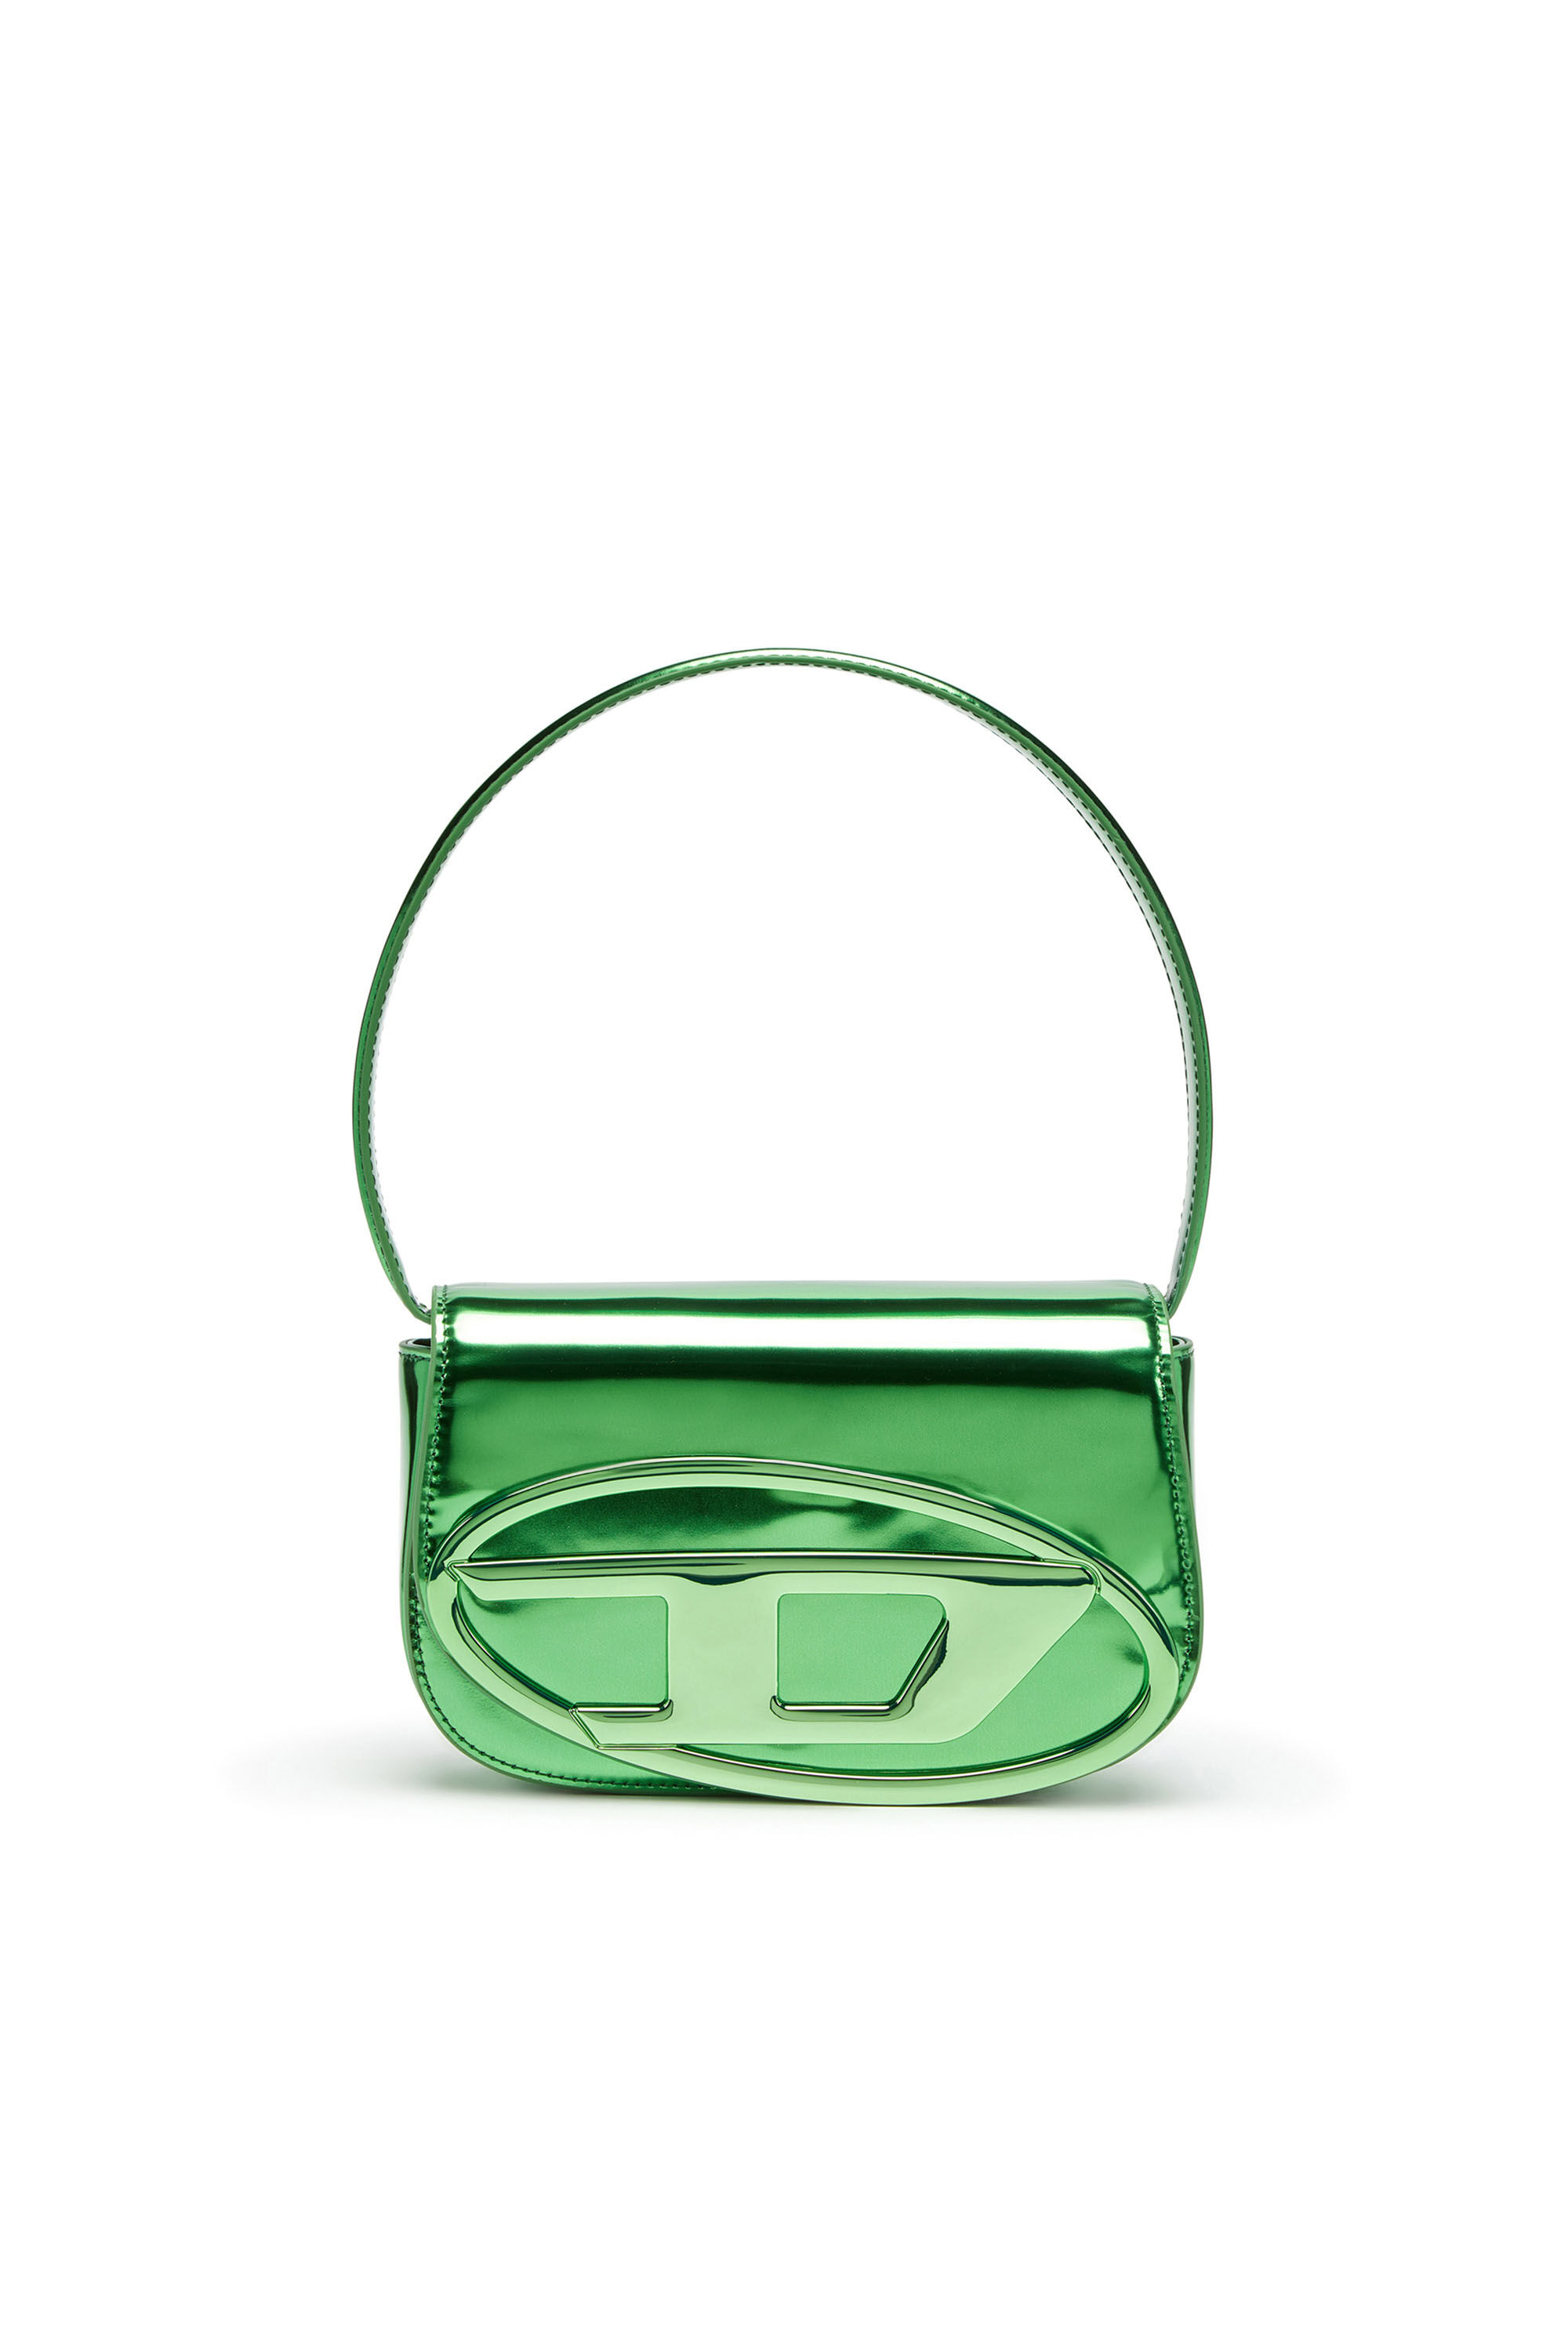 Women's 1DR-Iconic shoulder bag in mirrored leather | Green | Diesel